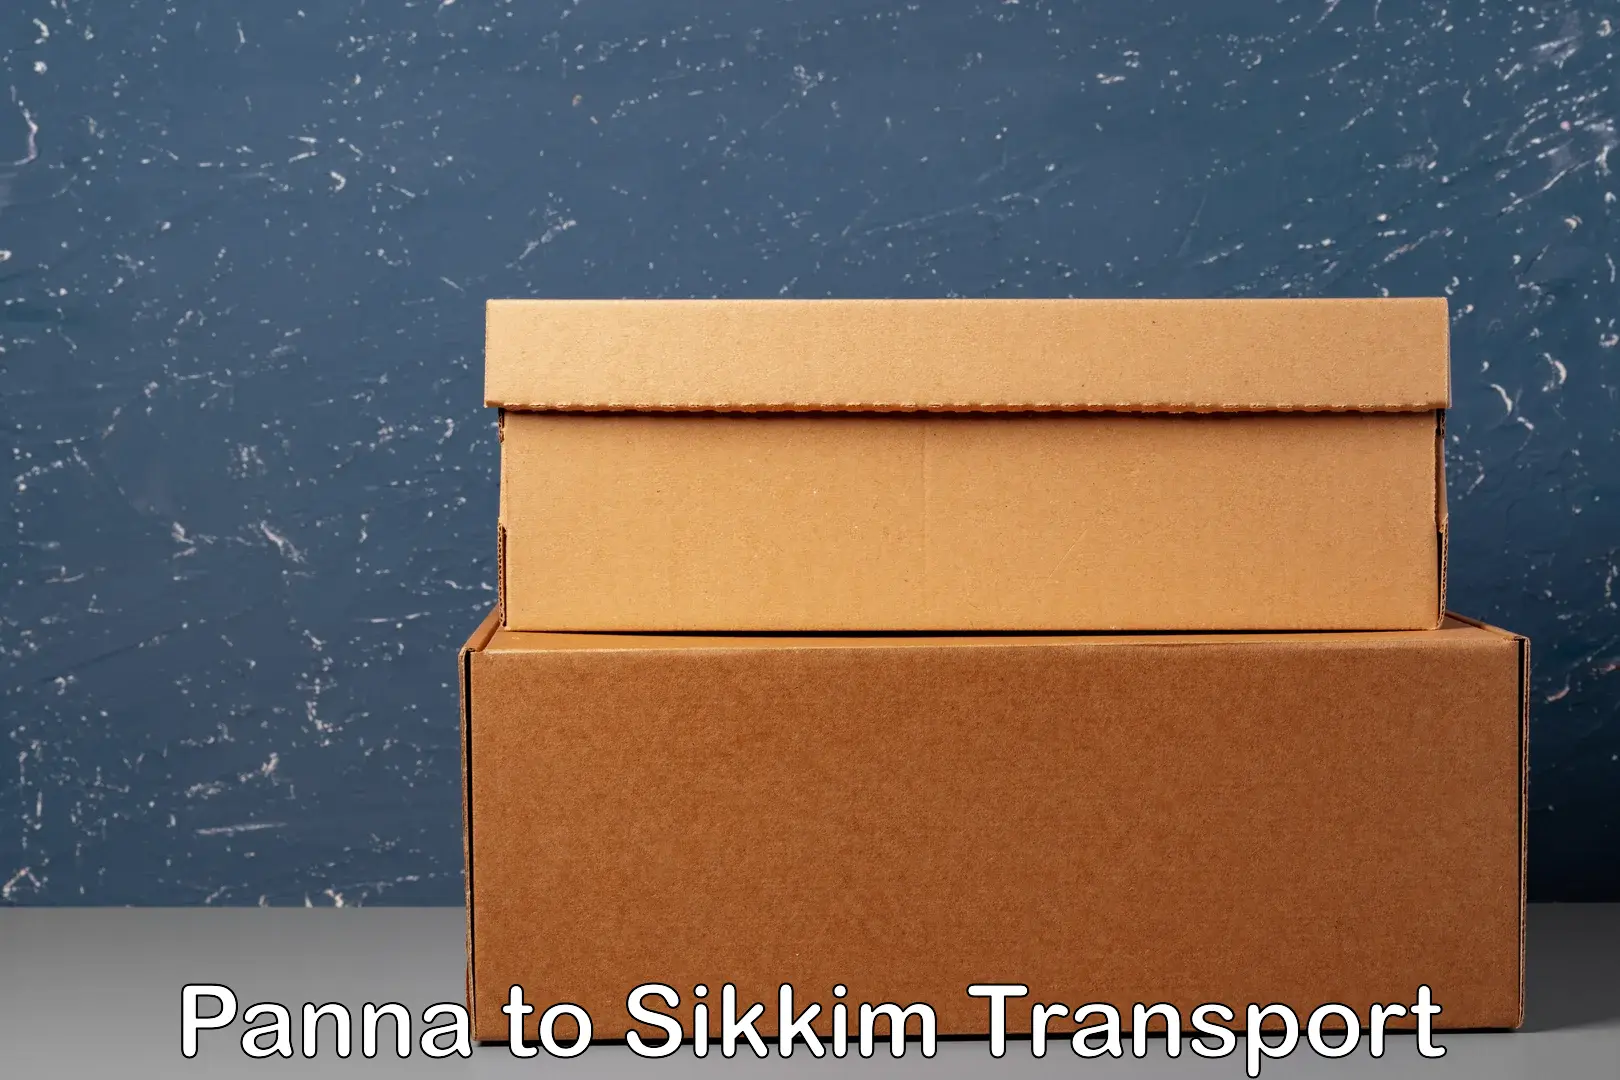 Commercial transport service Panna to Sikkim